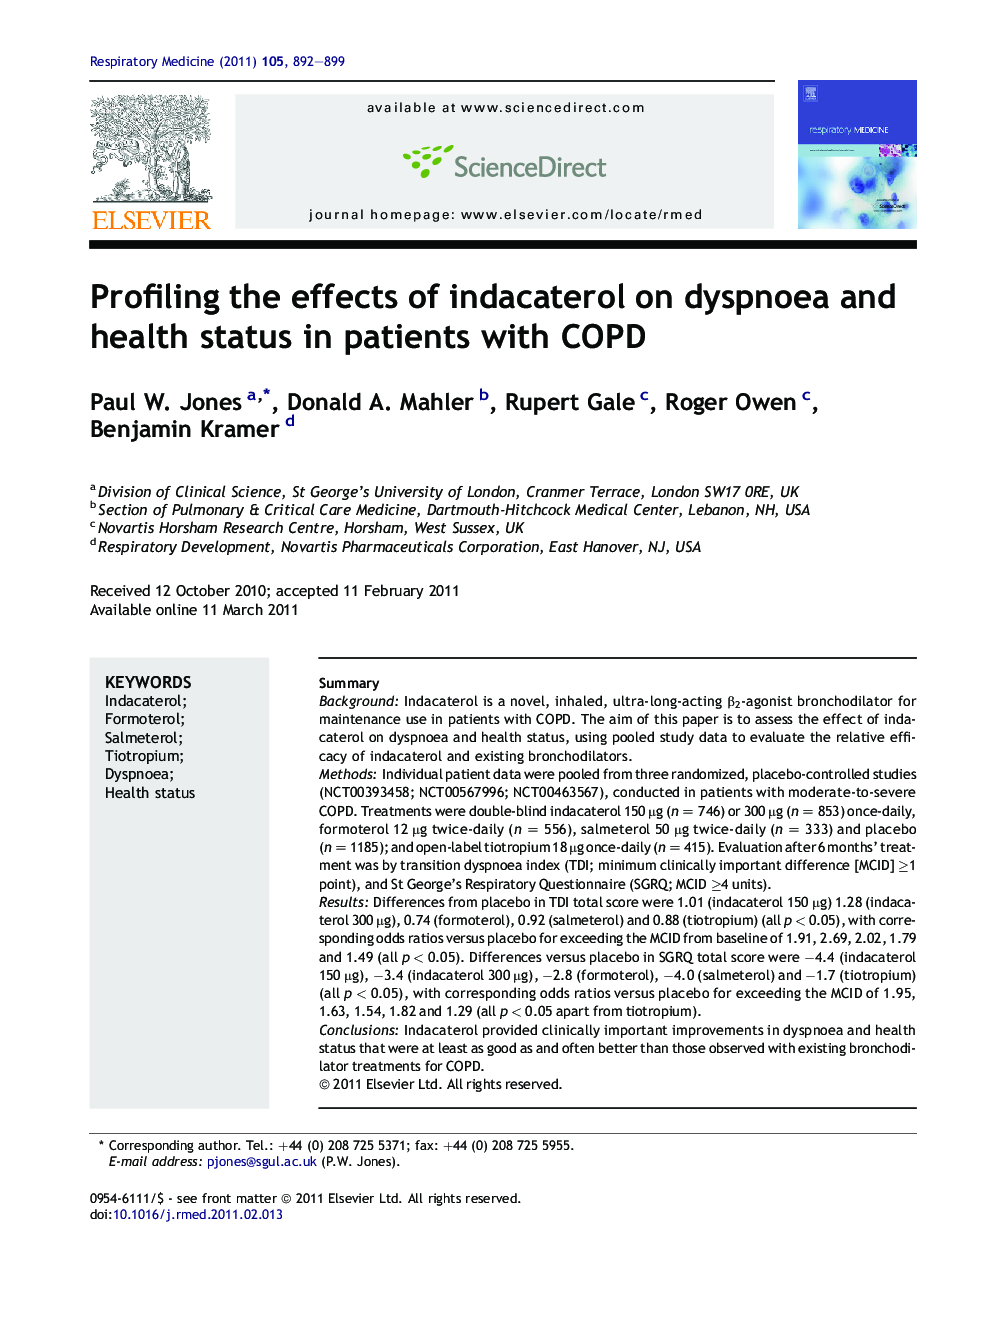 Profiling the effects of indacaterol on dyspnoea and health status in patients with COPD